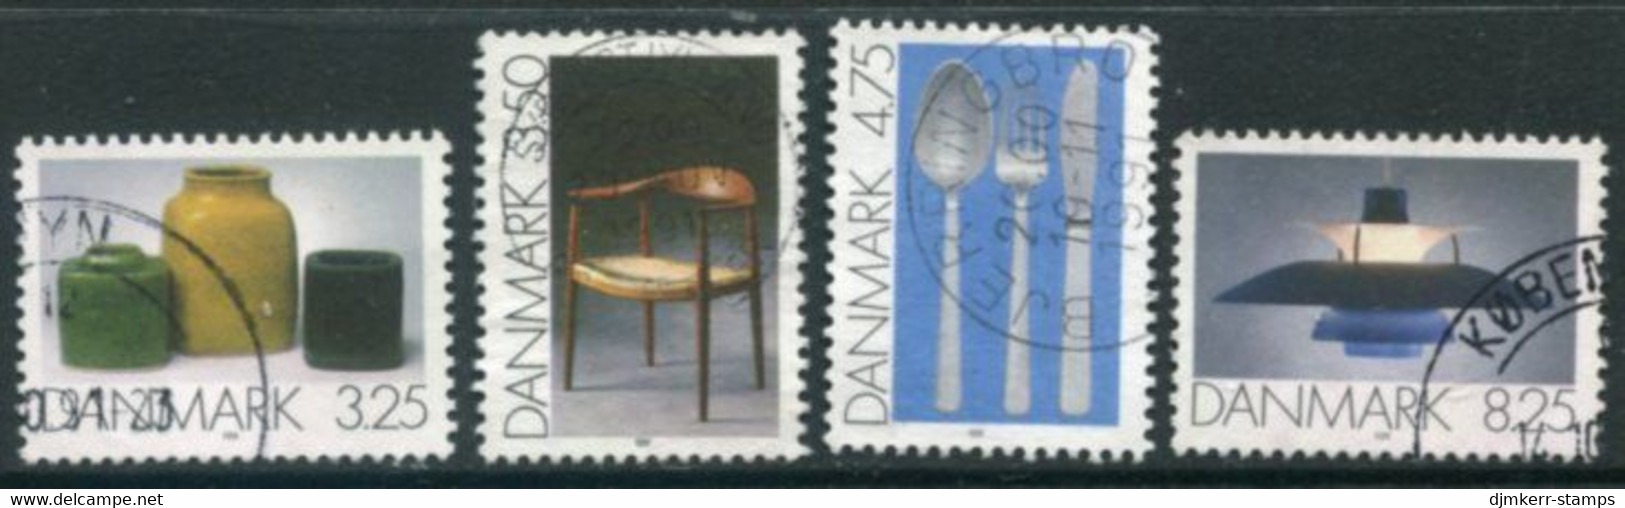 DENMARK 1991 Functional Art Used.   Michel 1006-09 - Used Stamps